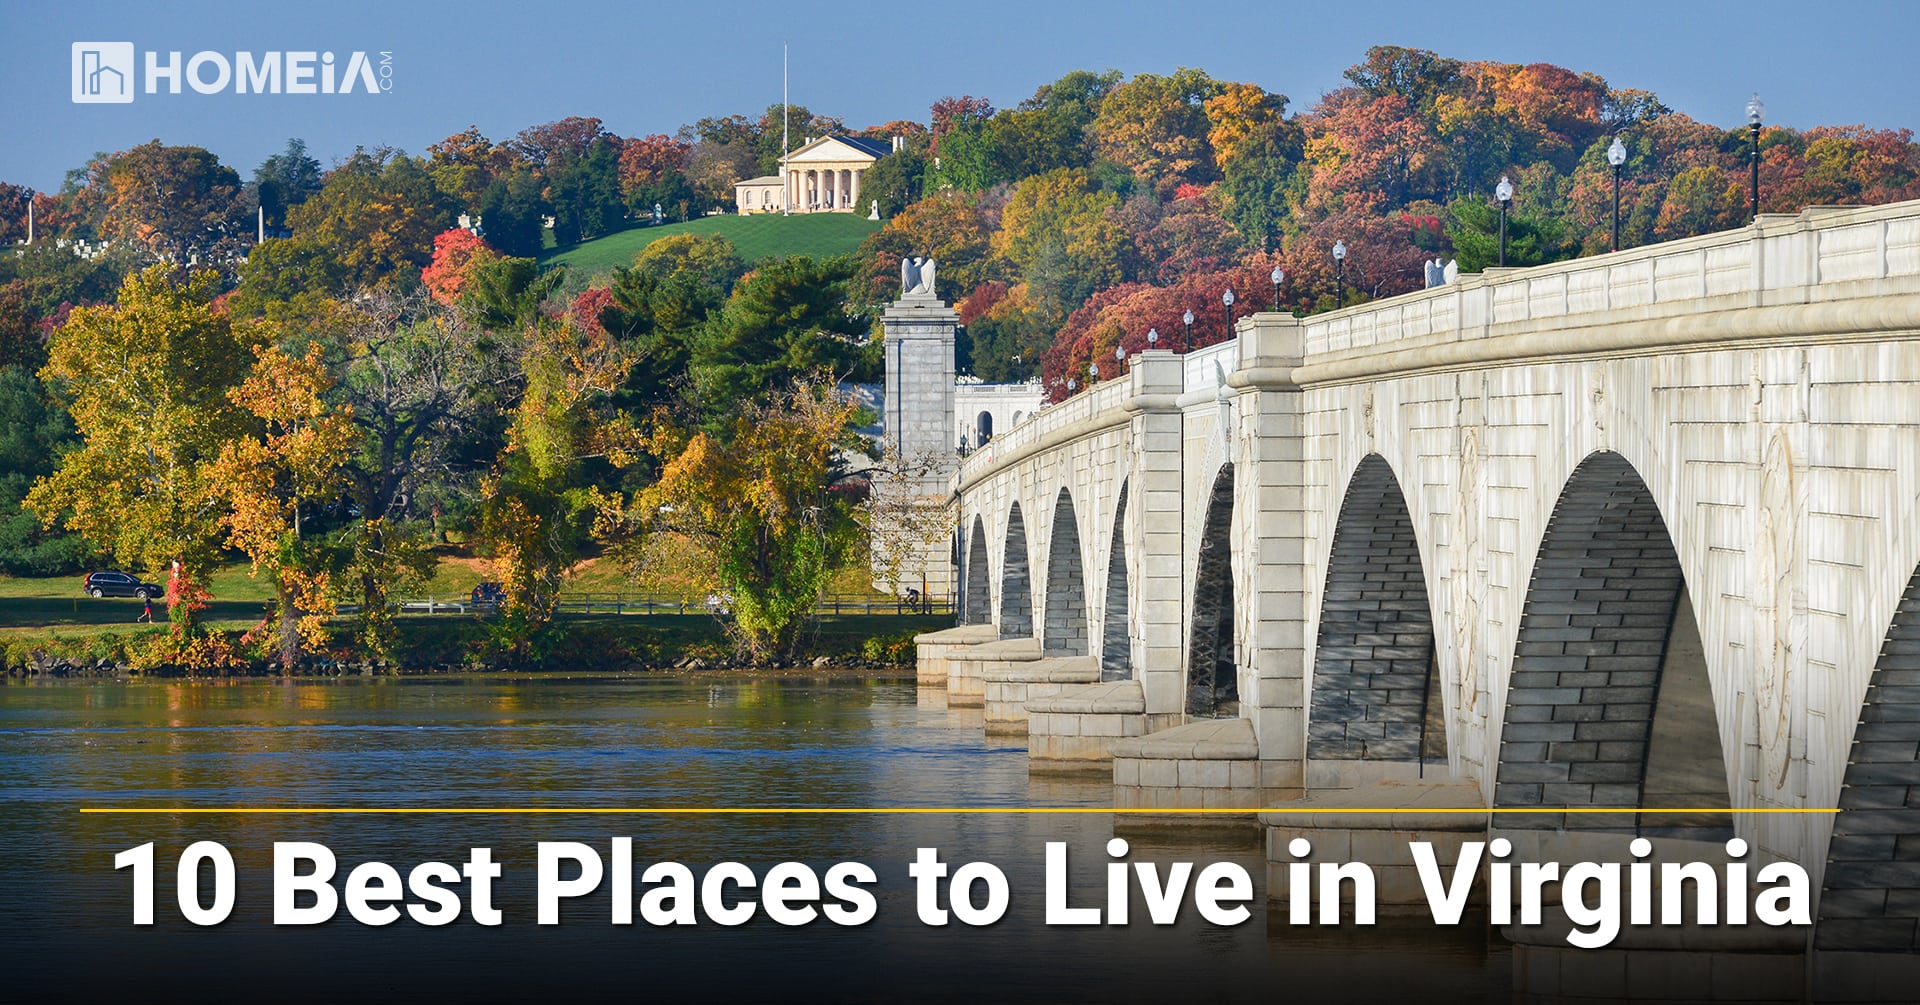 10 Best Places to Live in Virginia for Families